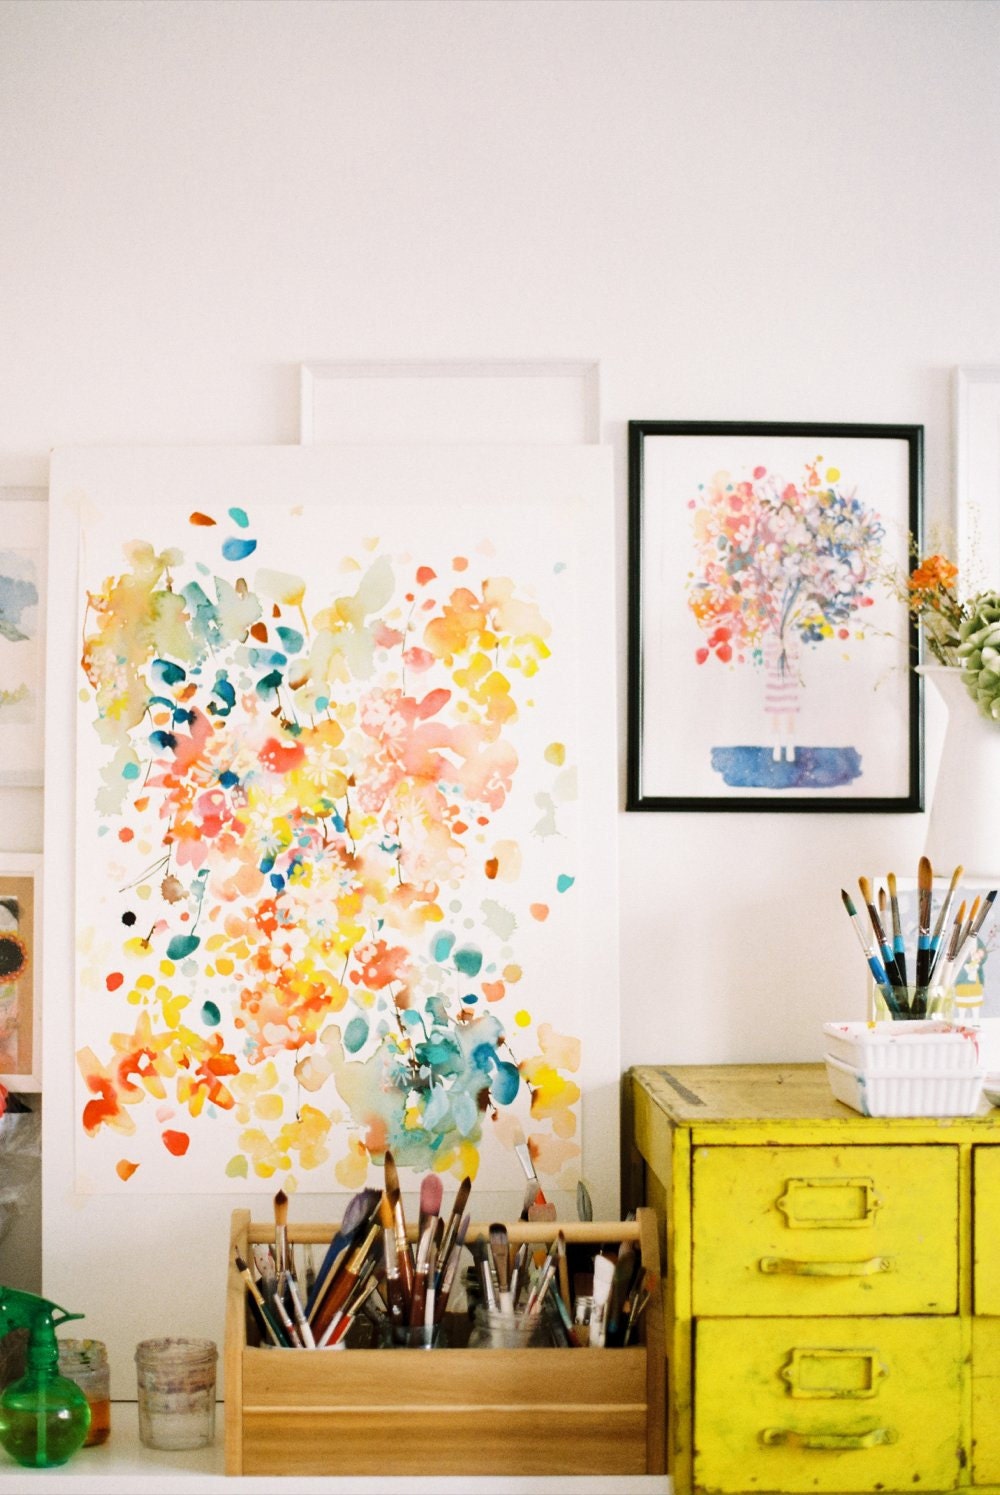 Canvas Painting Ideas and DIY Abstract Art